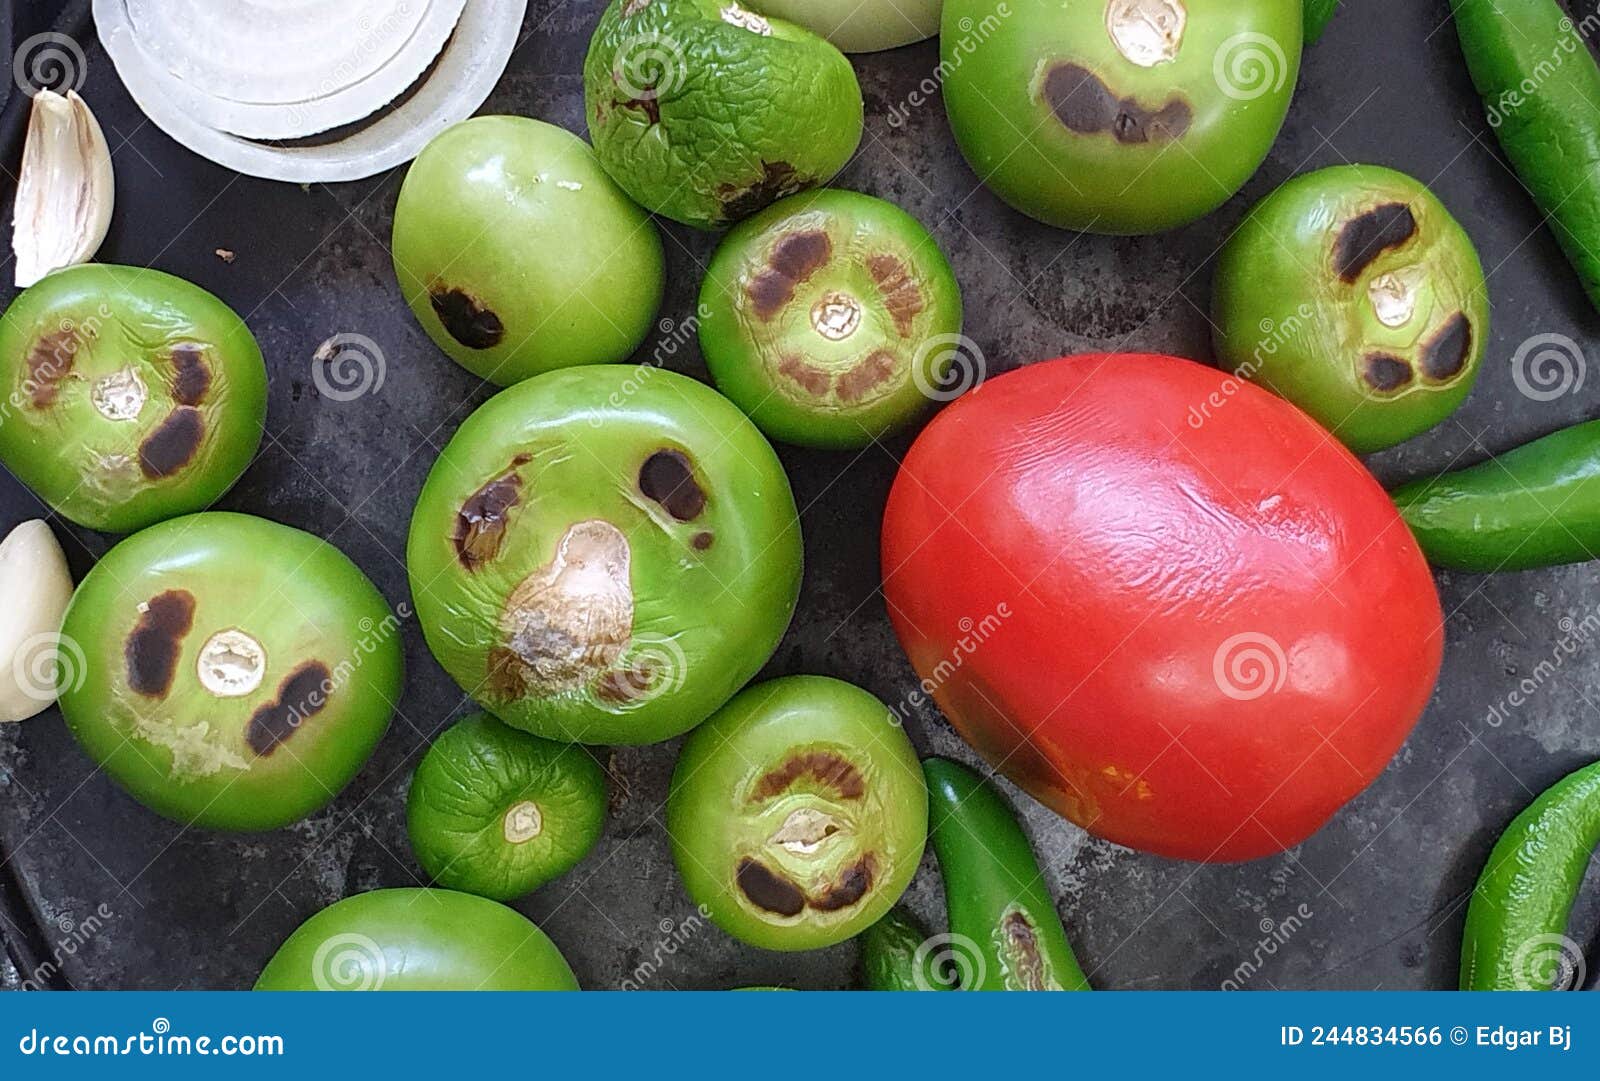 https://thumbs.dreamstime.com/z/comal-ingredients-to-prepare-traditional-mexican-sauce-which-includes-tomato-chili-peppers-tomato-onion-garlic-comal-244834566.jpg